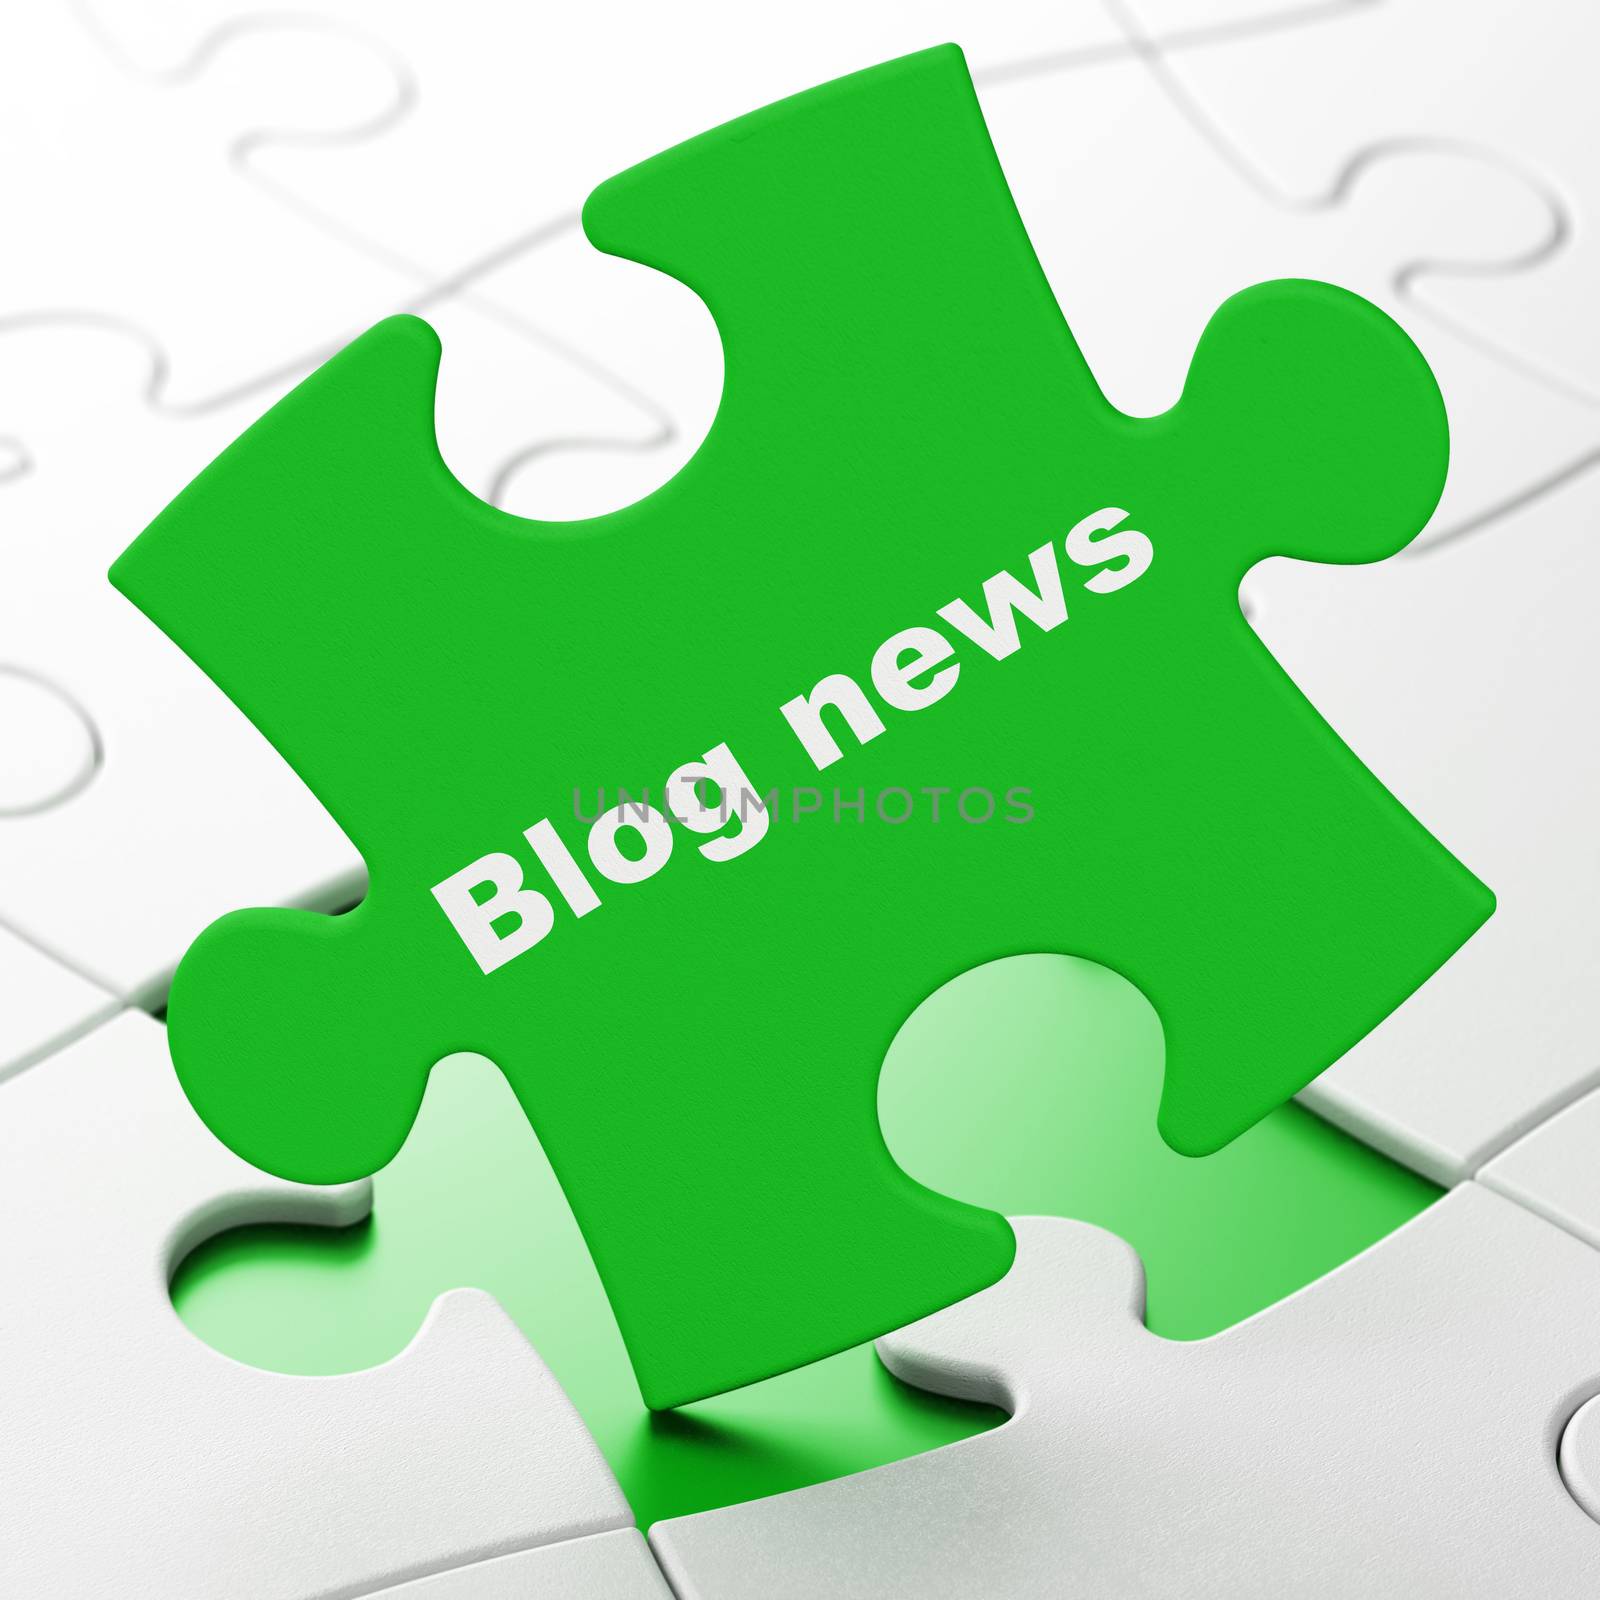 News concept: Blog News on Green puzzle pieces background, 3d render